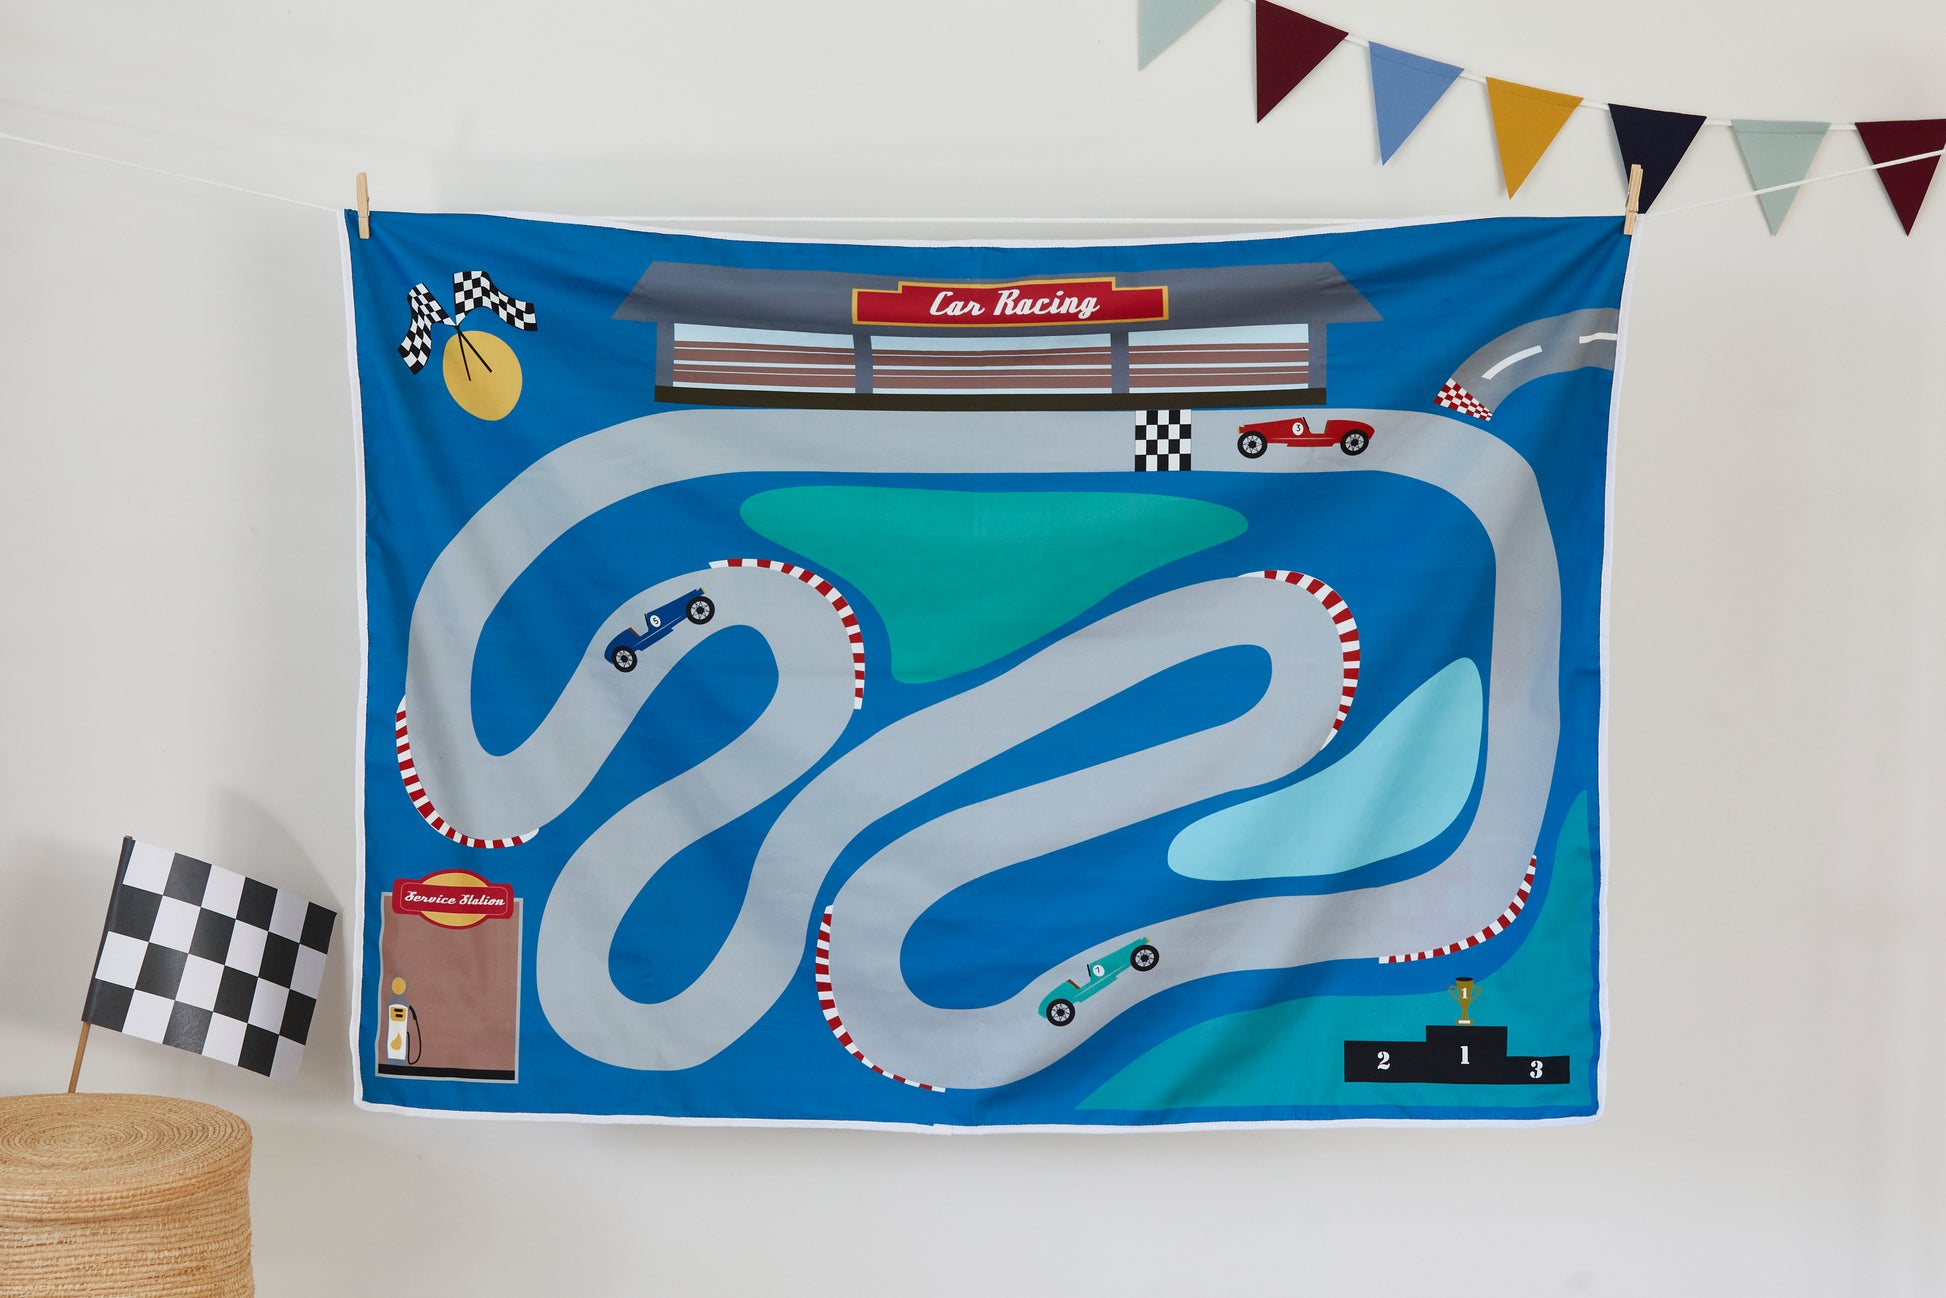 Children playmat set, 100% cotton and FSC timber cars, size 1m x 1.4m includes carry strap and 2 cars. Double sided printed (Race track & town theme) Portable, lightweight, durable and washable. Perfect portable solution for busy caregivers. Supports your child's imagination. Environmentally friendly packaging.